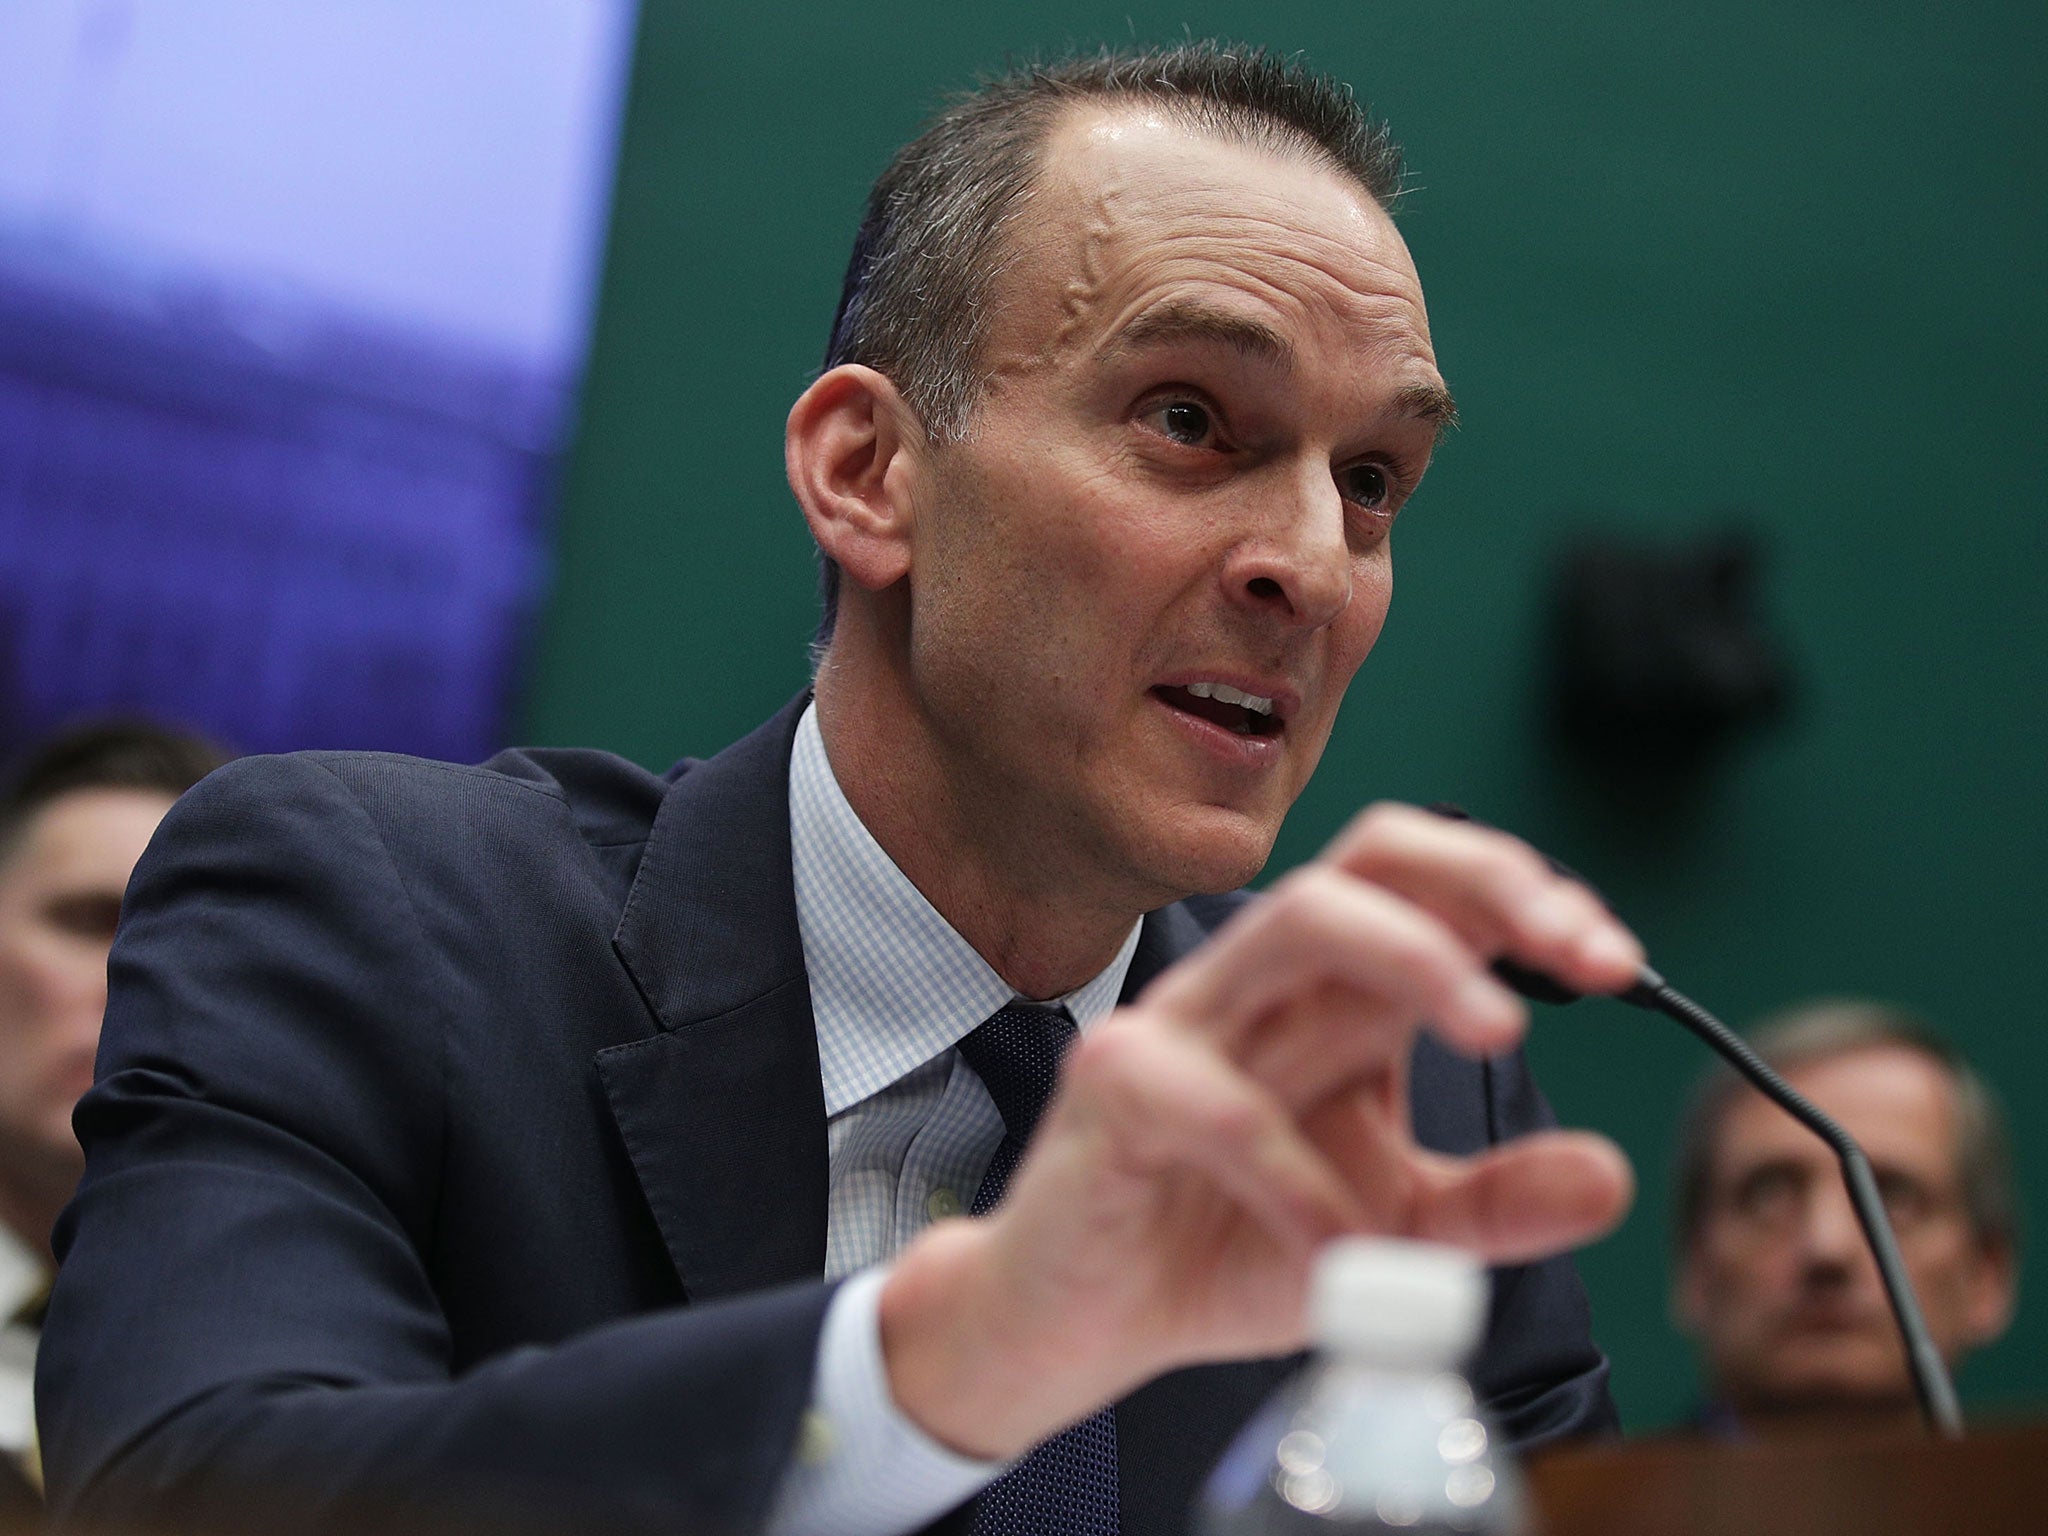 US Anti-Doping agency chief executive Travis Tygart claimed Wada's actions towards Russia 'stinks to high heaven'